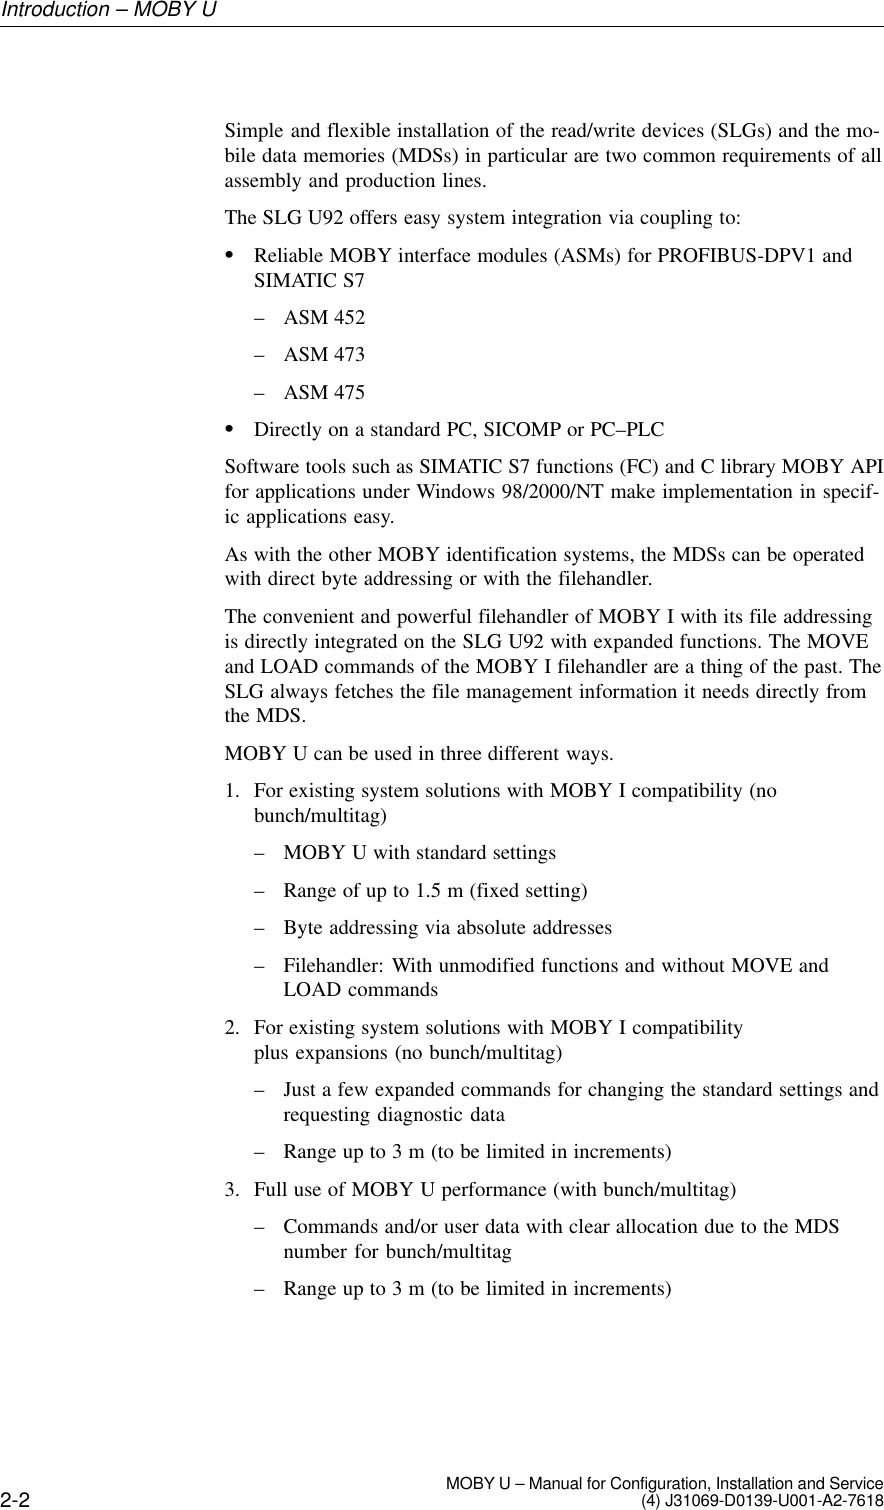 2-2 MOBY U – Manual for Configuration, Installation and Service(4) J31069-D0139-U001-A2-7618Simple and flexible installation of the read/write devices (SLGs) and the mo-bile data memories (MDSs) in particular are two common requirements of allassembly and production lines.The SLG U92 offers easy system integration via coupling to:Reliable MOBY interface modules (ASMs) for PROFIBUS-DPV1 andSIMATIC S7– ASM 452– ASM 473– ASM 475Directly on a standard PC, SICOMP or PC–PLCSoftware tools such as SIMATIC S7 functions (FC) and C library MOBY APIfor applications under Windows 98/2000/NT make implementation in specif-ic applications easy.As with the other MOBY identification systems, the MDSs can be operatedwith direct byte addressing or with the filehandler.The convenient and powerful filehandler of MOBY I with its file addressingis directly integrated on the SLG U92 with expanded functions. The MOVEand LOAD commands of the MOBY I filehandler are a thing of the past. TheSLG always fetches the file management information it needs directly fromthe MDS.MOBY U can be used in three different ways.1. For existing system solutions with MOBY I compatibility (nobunch/multitag)– MOBY U with standard settings– Range of up to 1.5 m (fixed setting)– Byte addressing via absolute addresses– Filehandler: With unmodified functions and without MOVE andLOAD commands2. For existing system solutions with MOBY I compatibilityplus expansions (no bunch/multitag)– Just a few expanded commands for changing the standard settings andrequesting diagnostic data– Range up to 3 m (to be limited in increments)3. Full use of MOBY U performance (with bunch/multitag)– Commands and/or user data with clear allocation due to the MDSnumber for bunch/multitag– Range up to 3 m (to be limited in increments)Introduction – MOBY U